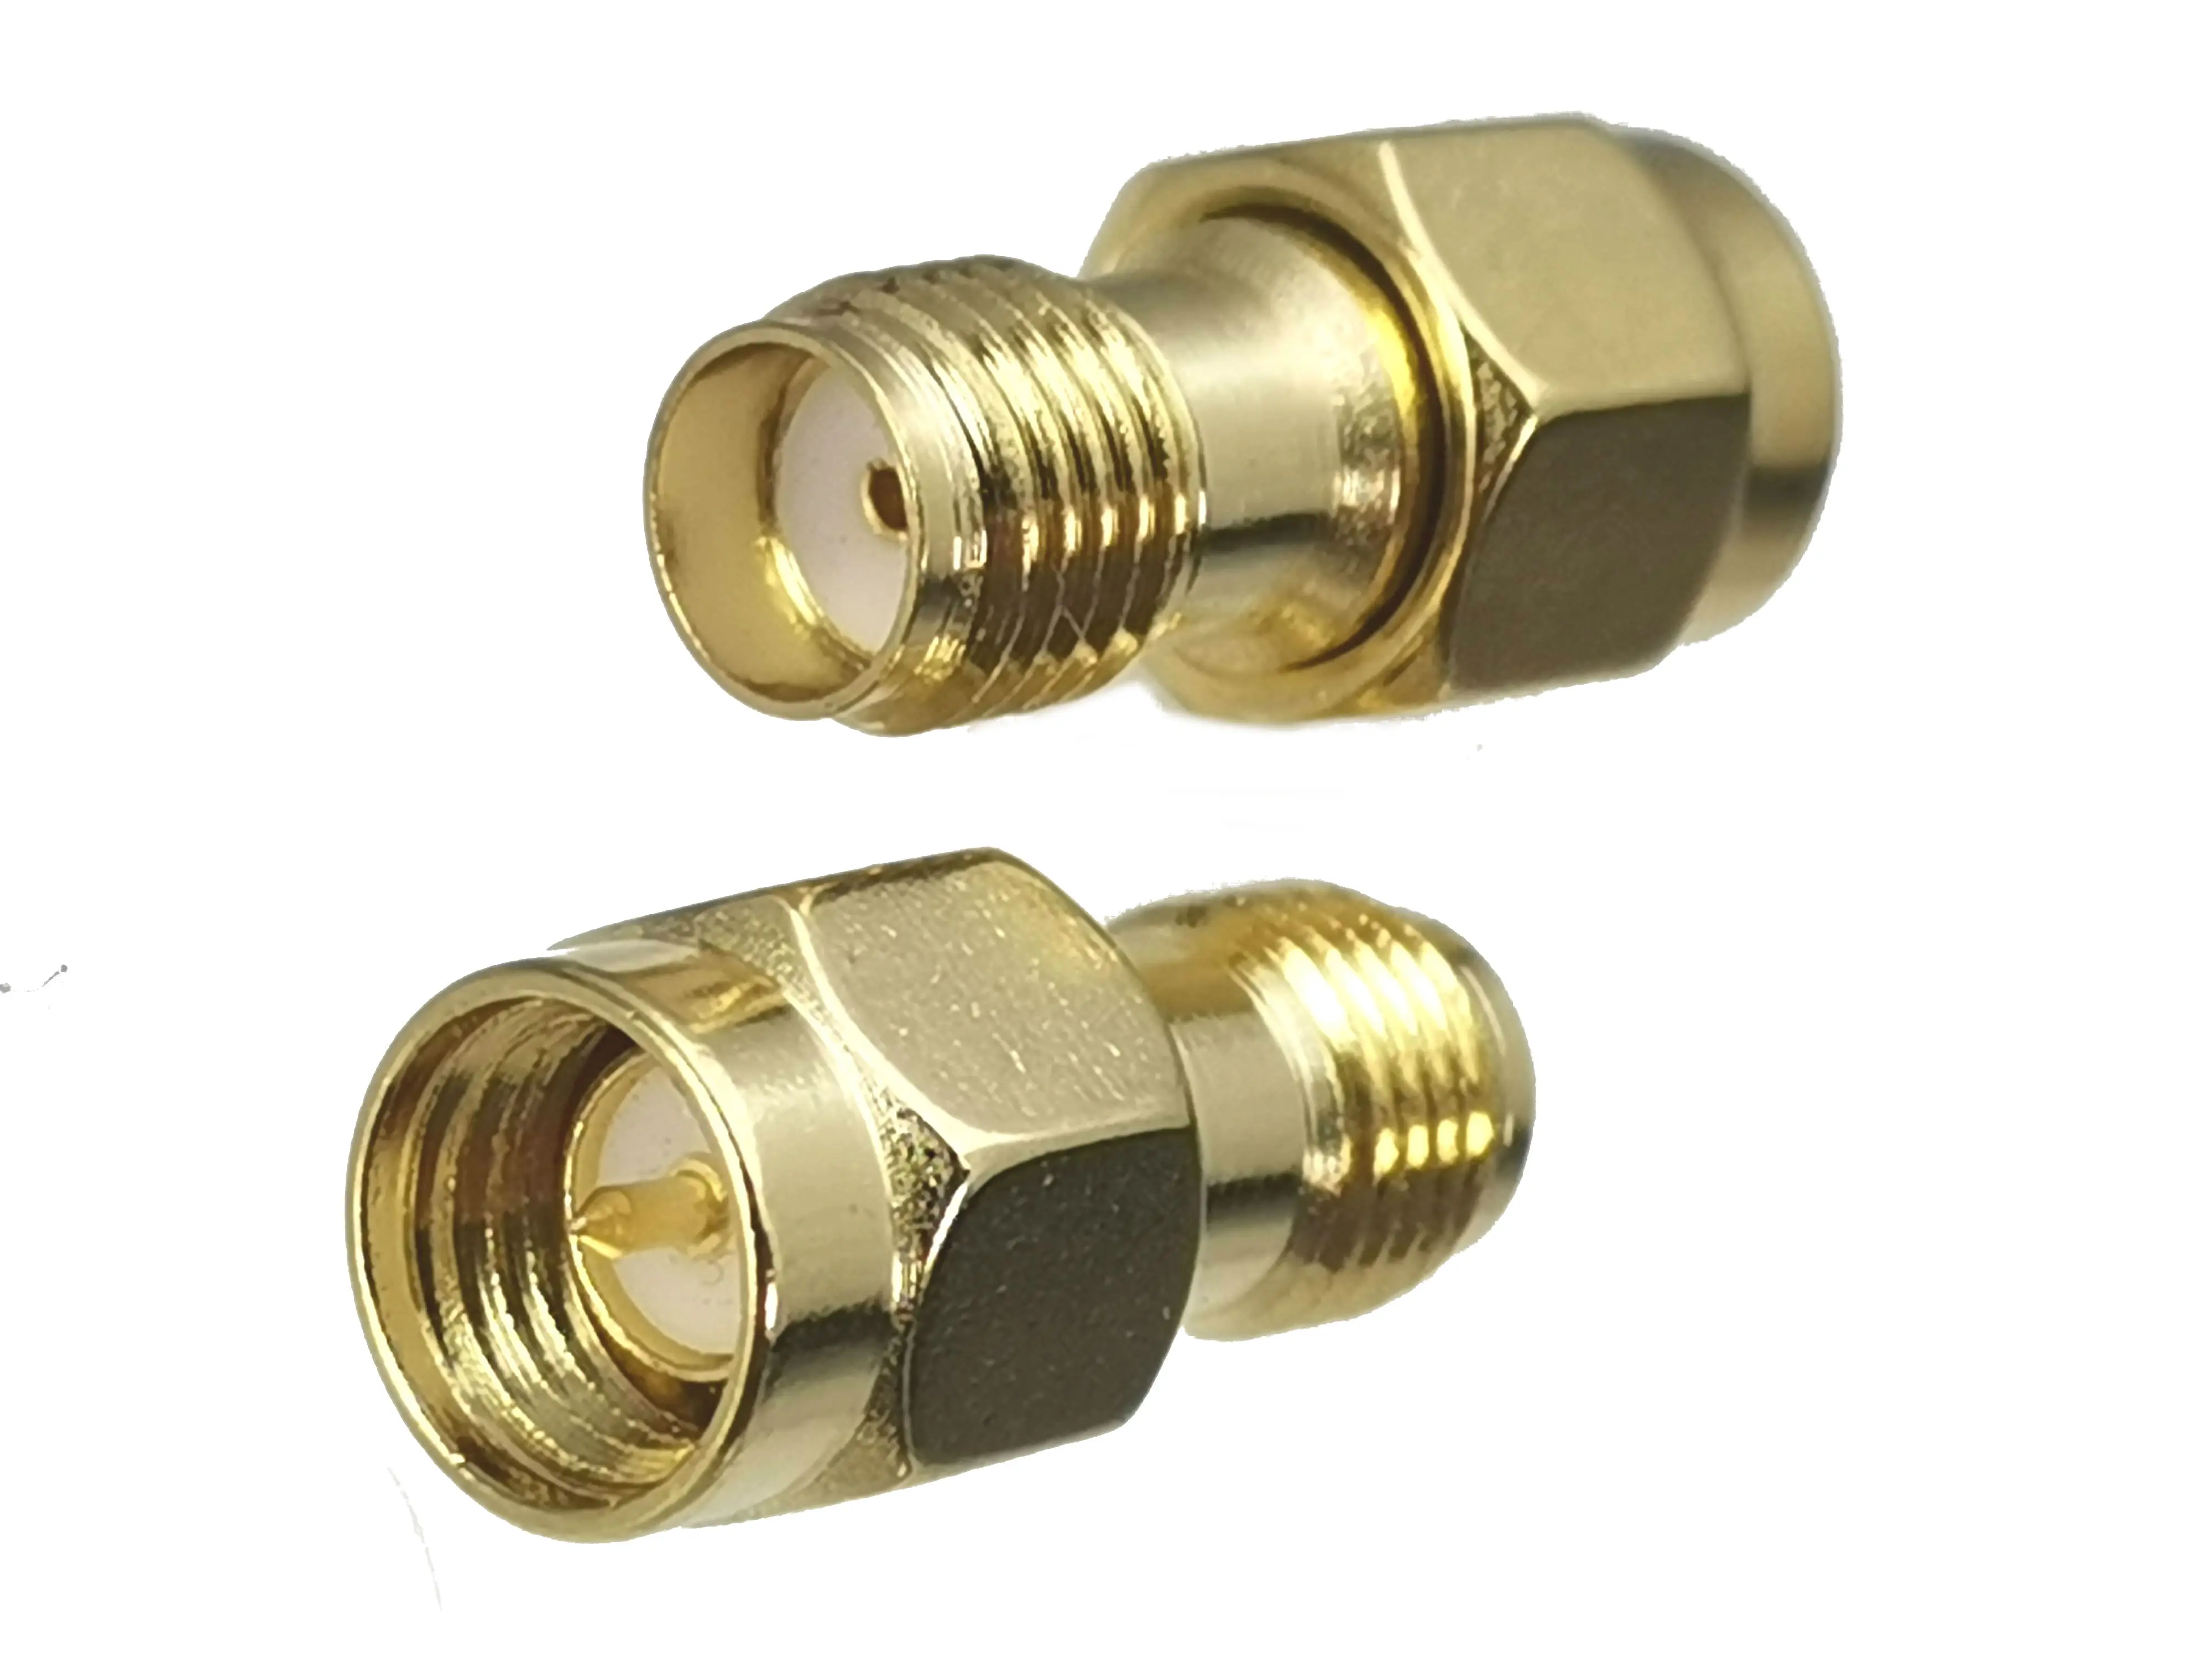 

1pcs Connector Adapter SMA Male Plug to SMA Female Jack RF Coaxial Converter Straight New Brass